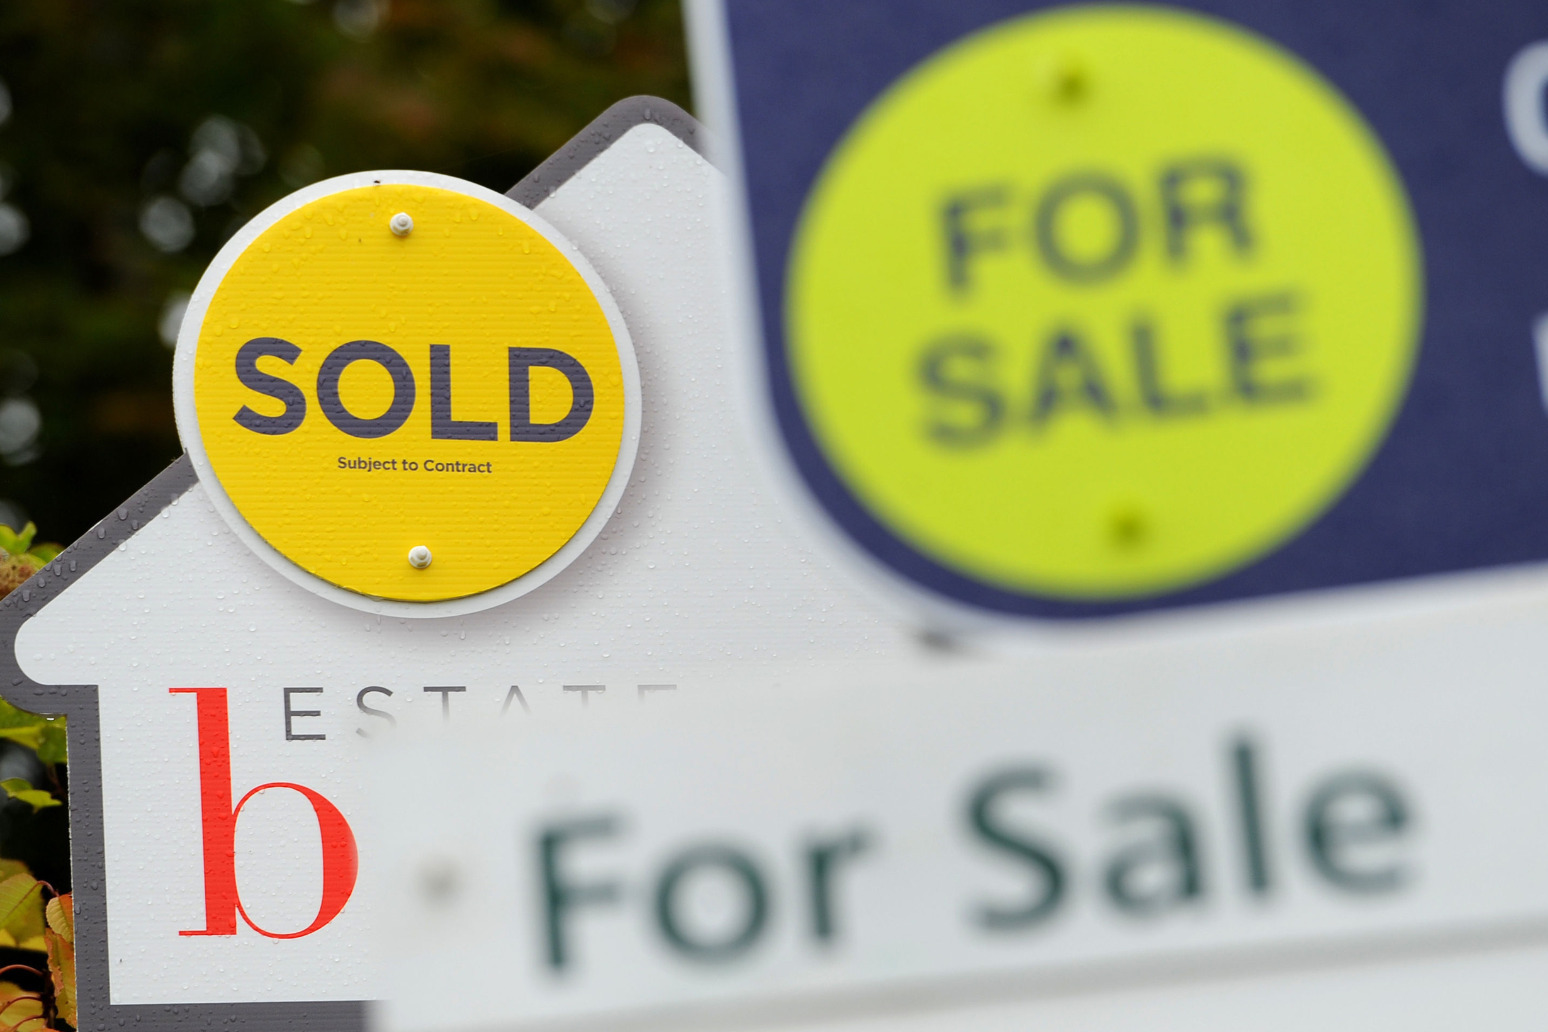 Cash-strapped homeowners urged to look for cheaper mortgage deals as rates rise 